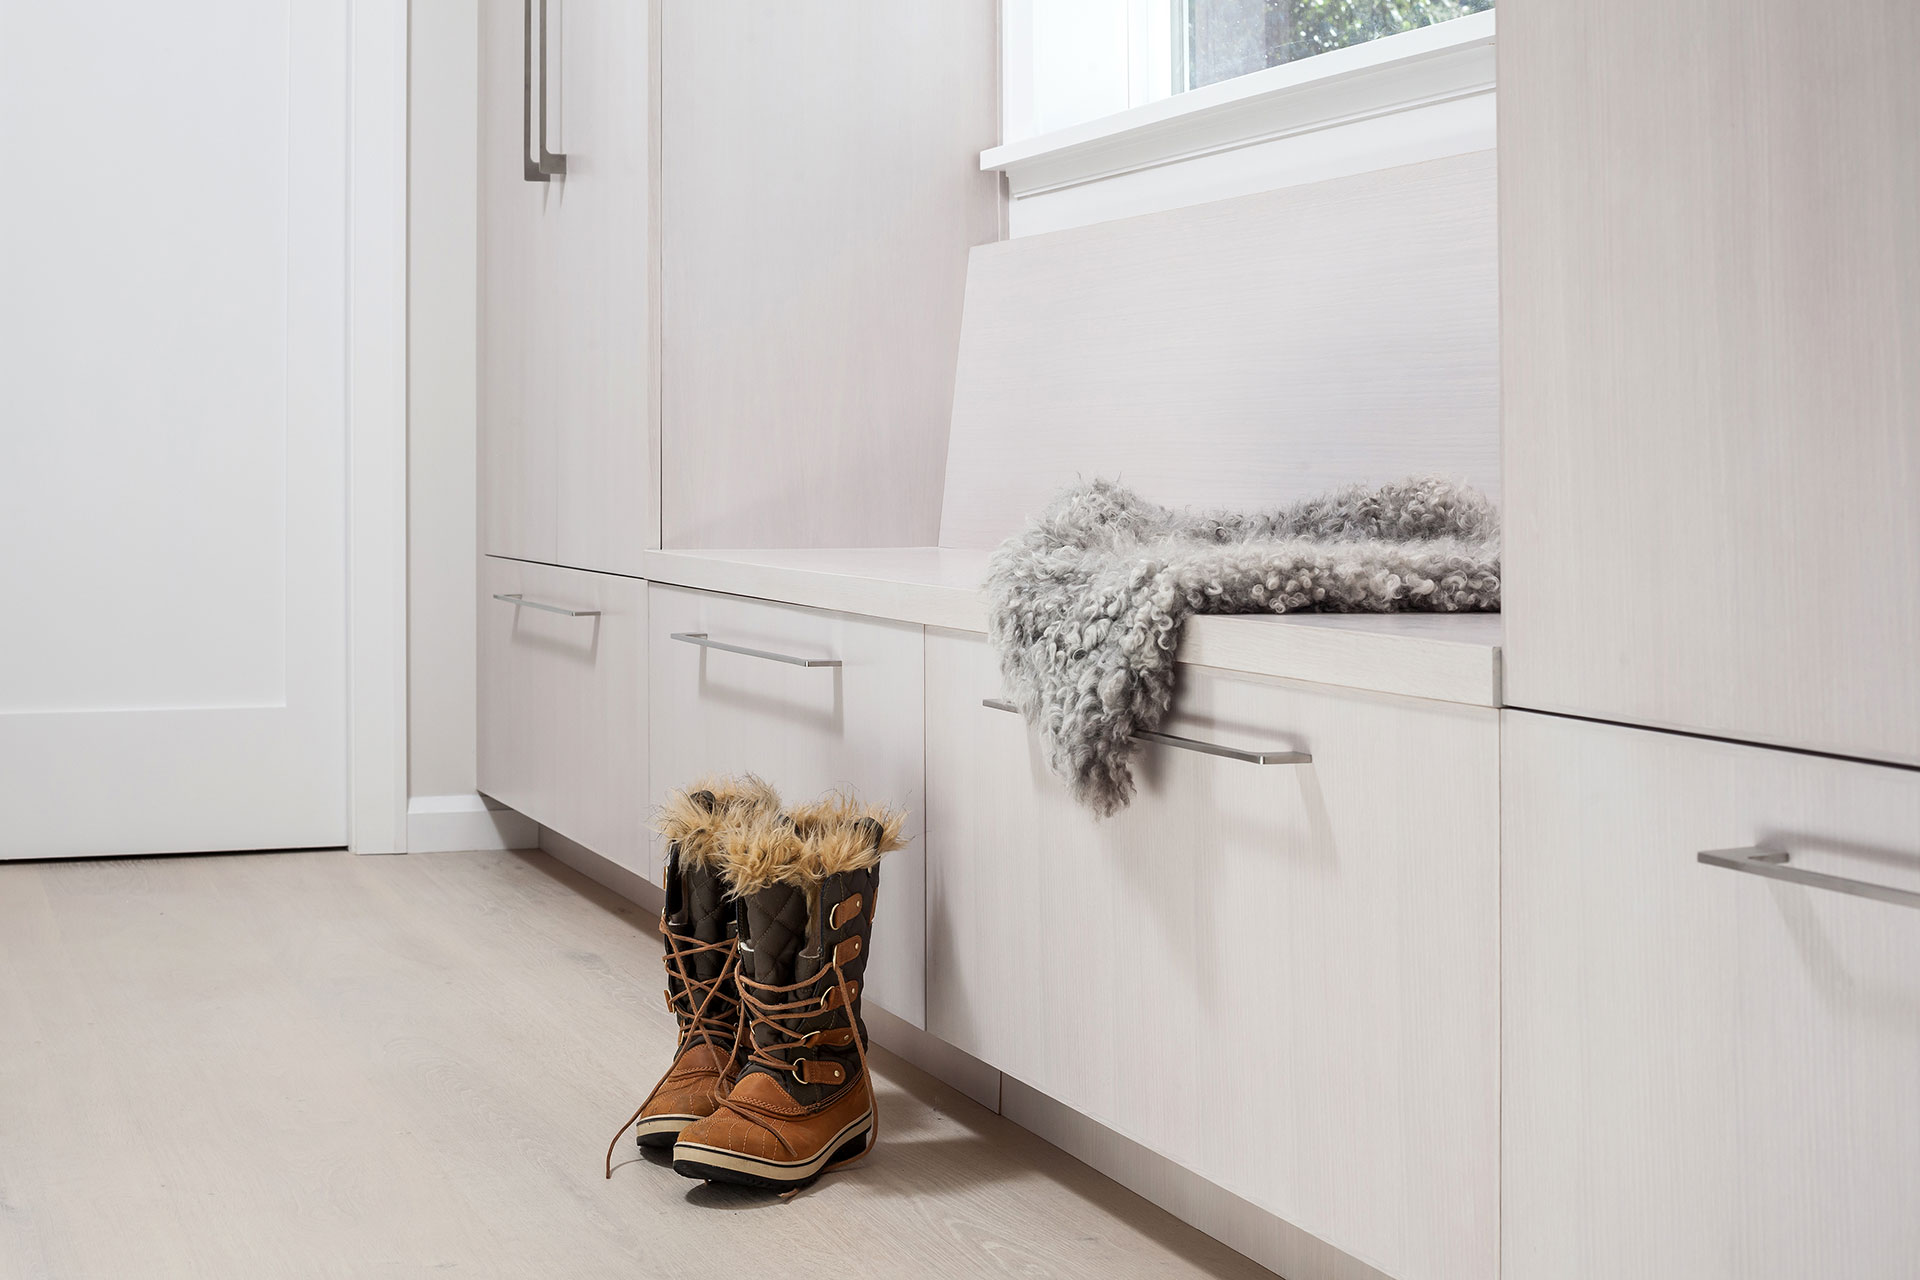 Warm winter boots sit next to the custom bench and cabinetry in the primary suite at the Modern Farmhouse.